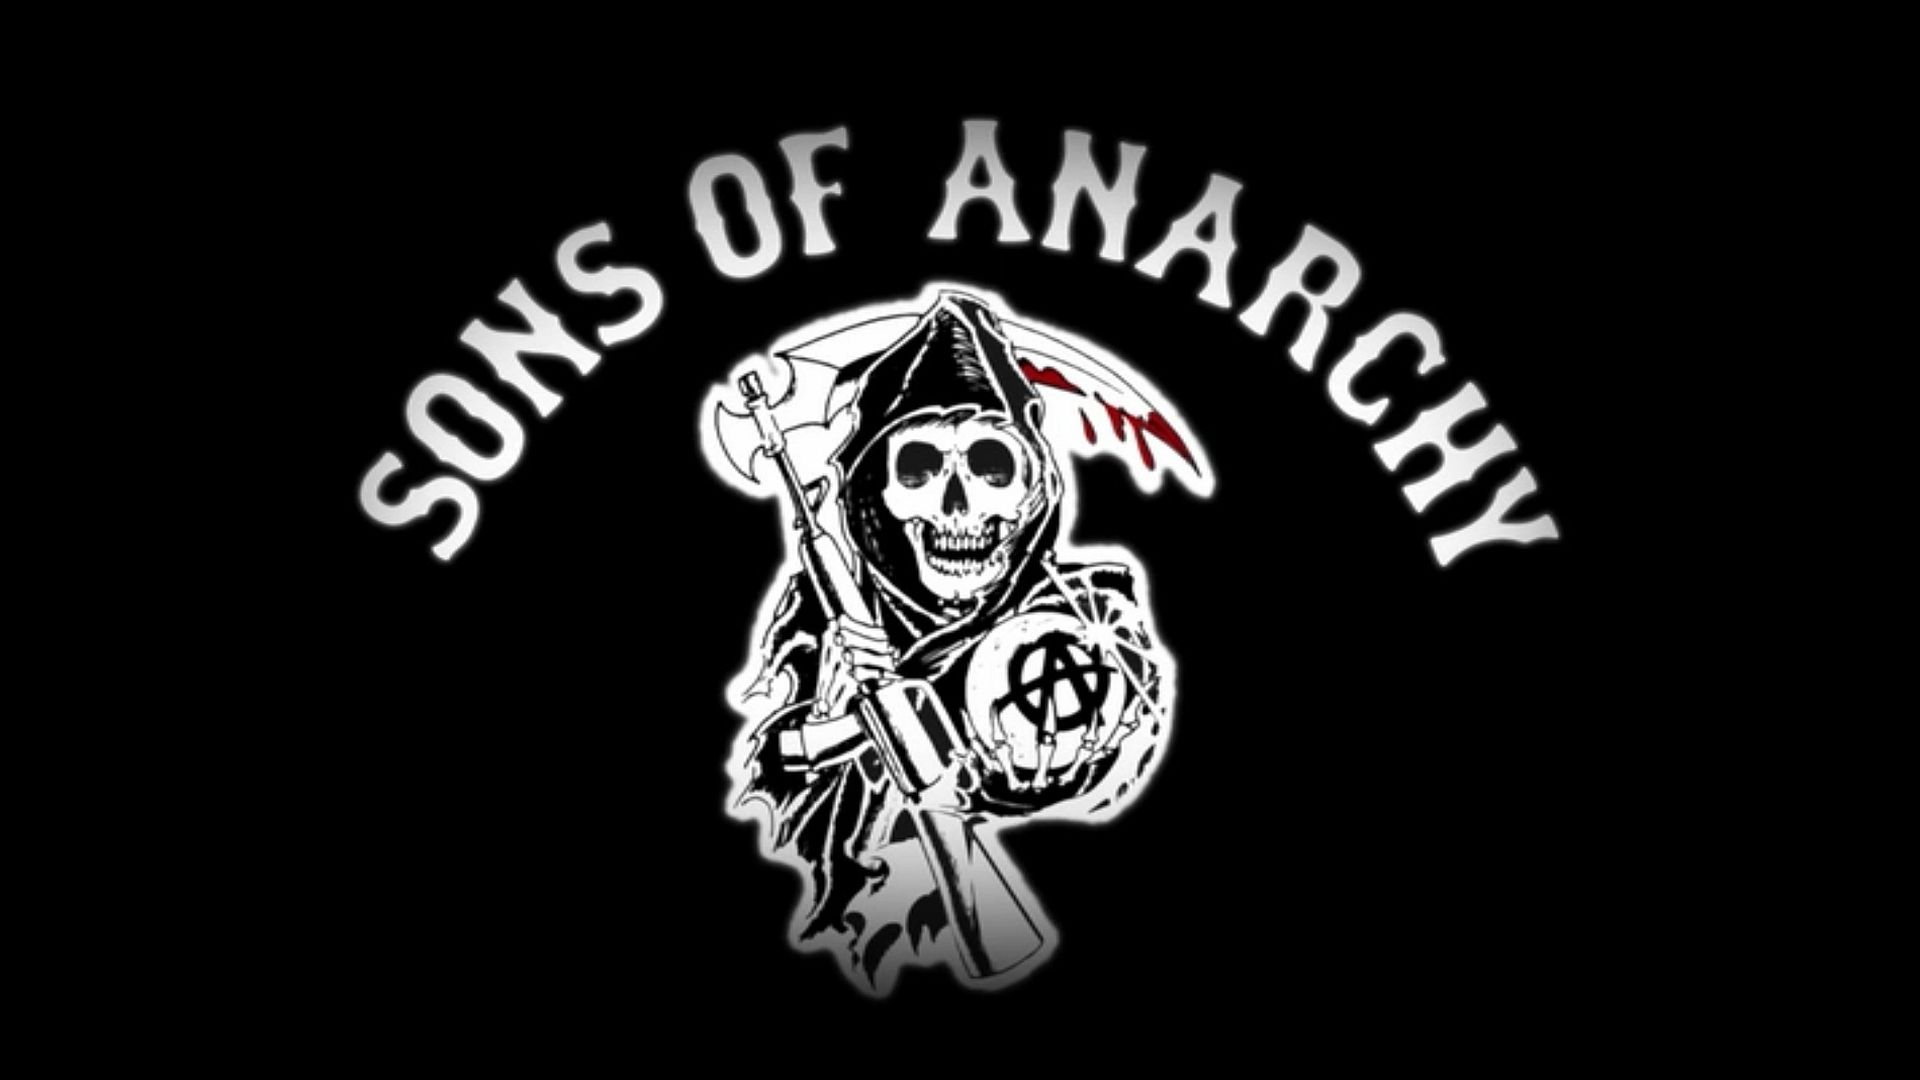 Sons Of Anarchy Computer Wallpapers, Desktop Backgrounds